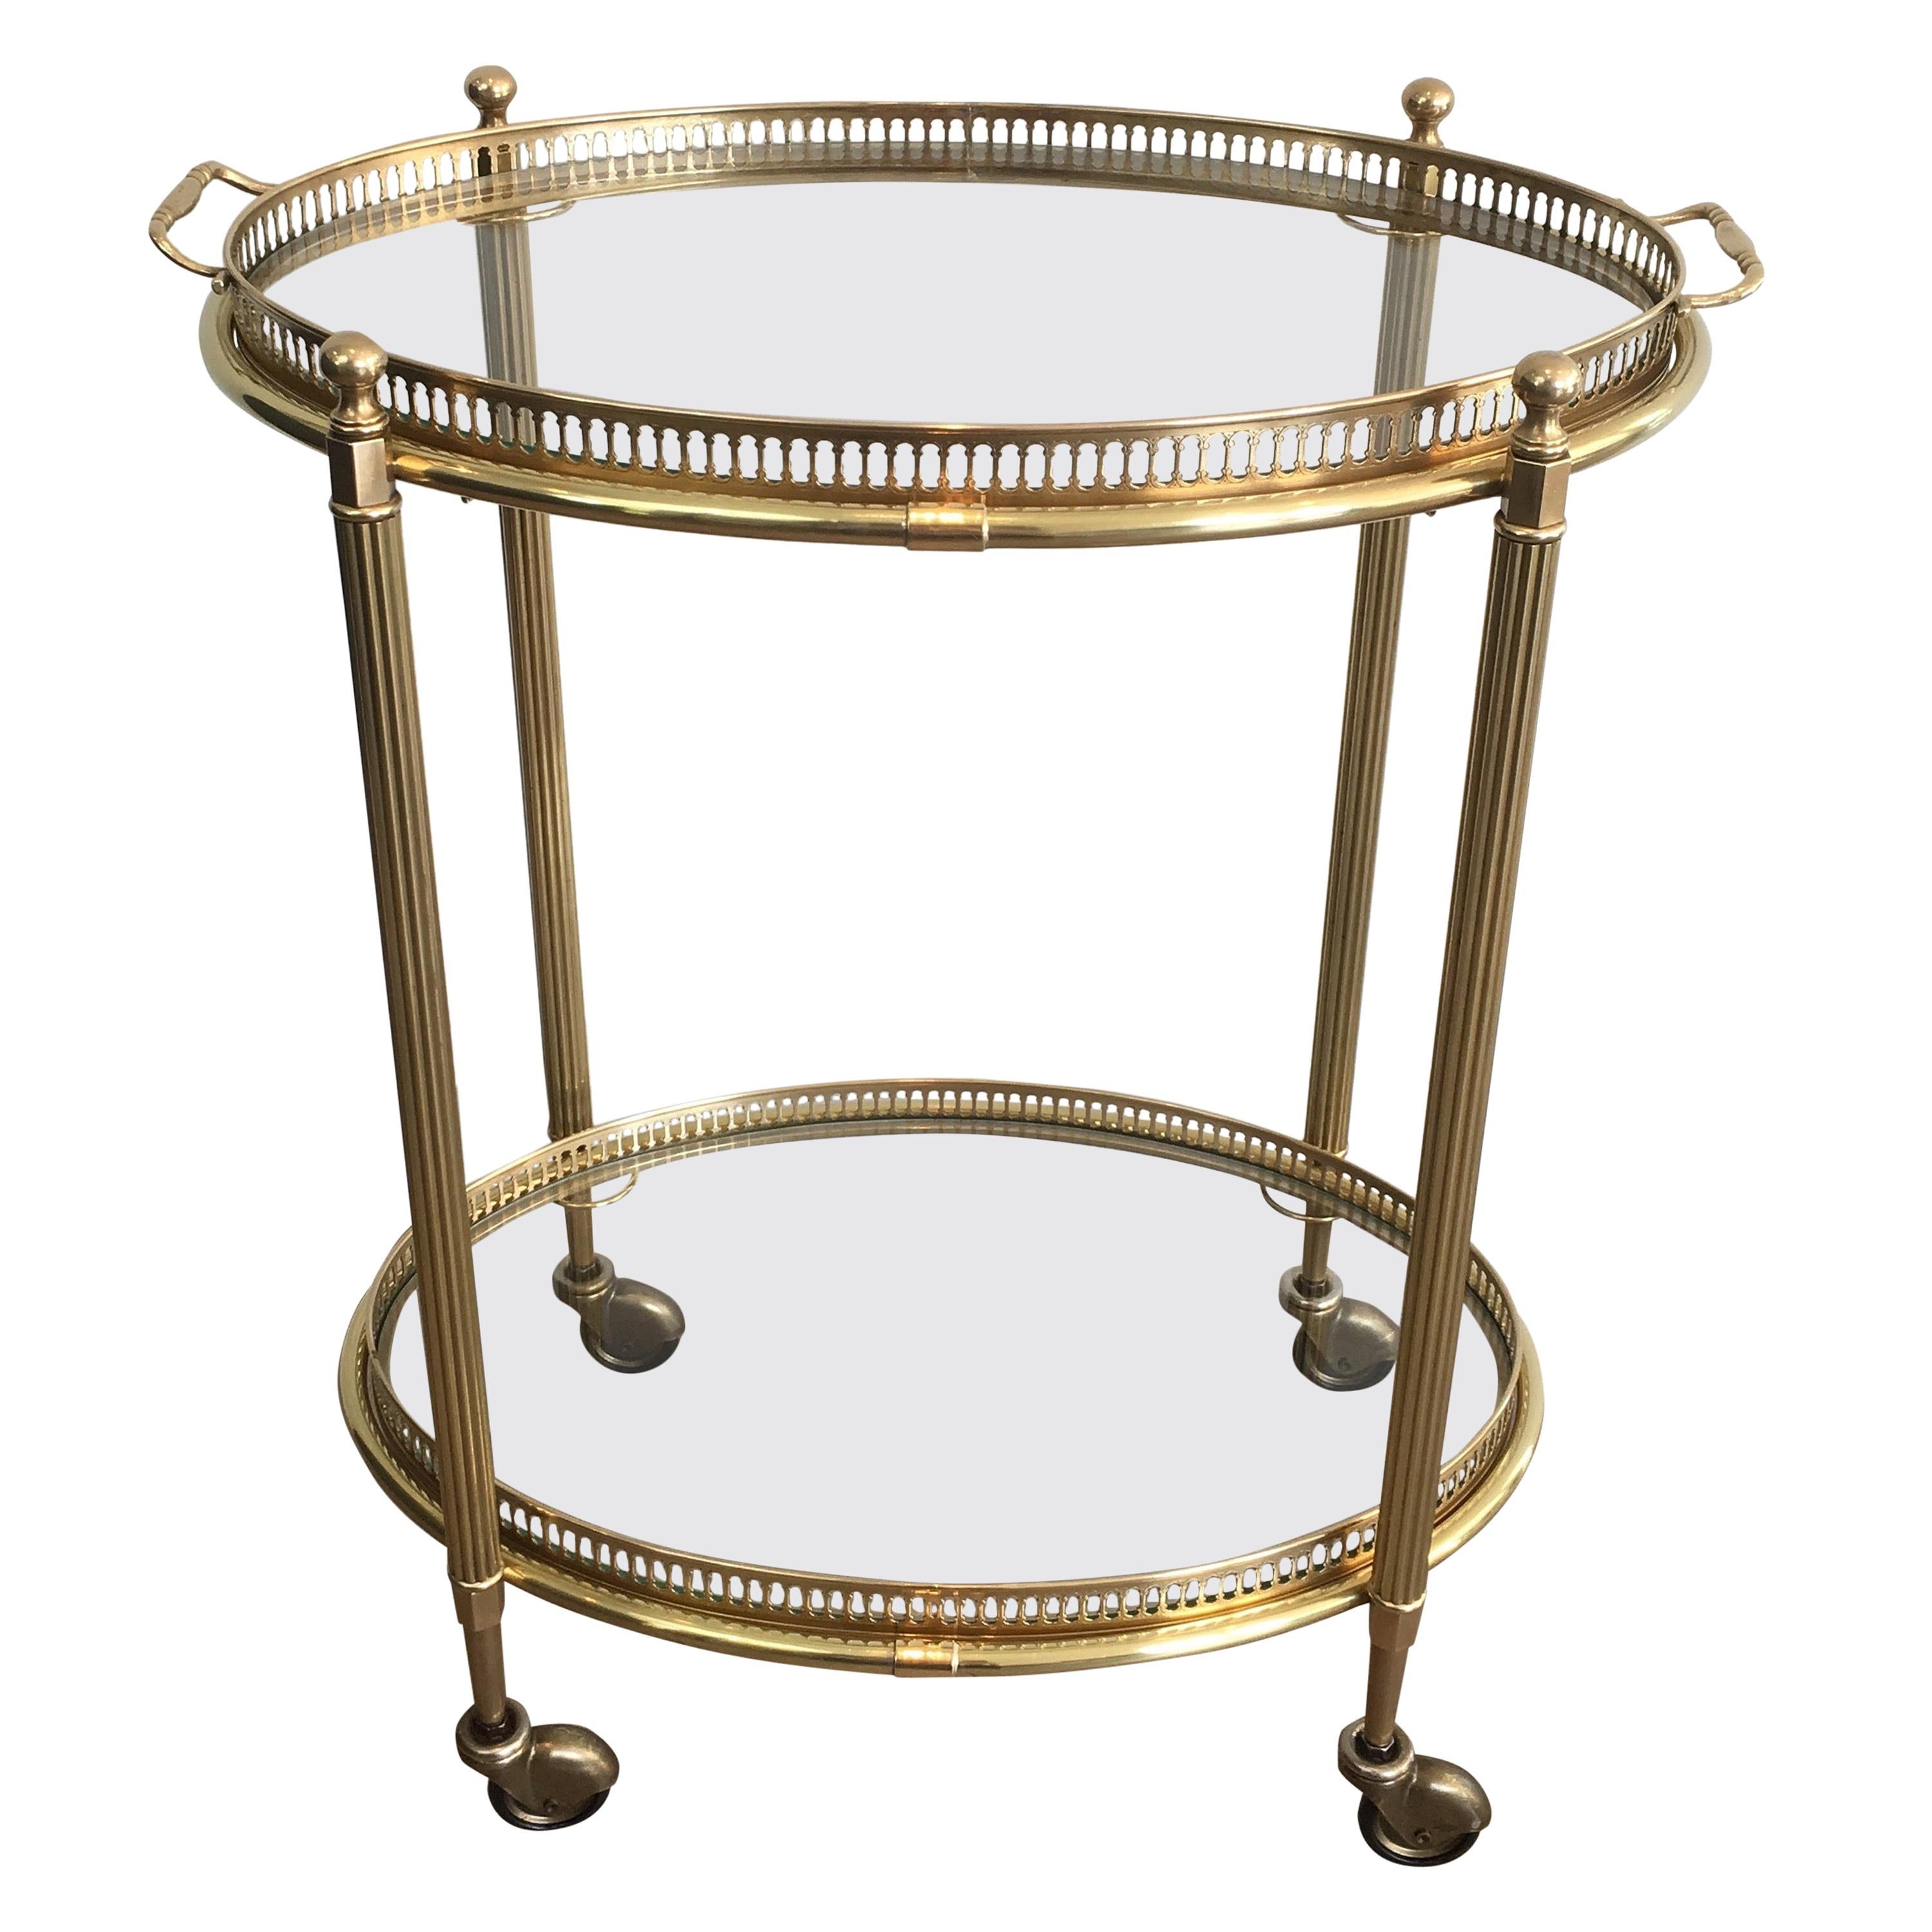 Neoclassical Style Oval Bar Cart with Removable Trays, French, circa 1940